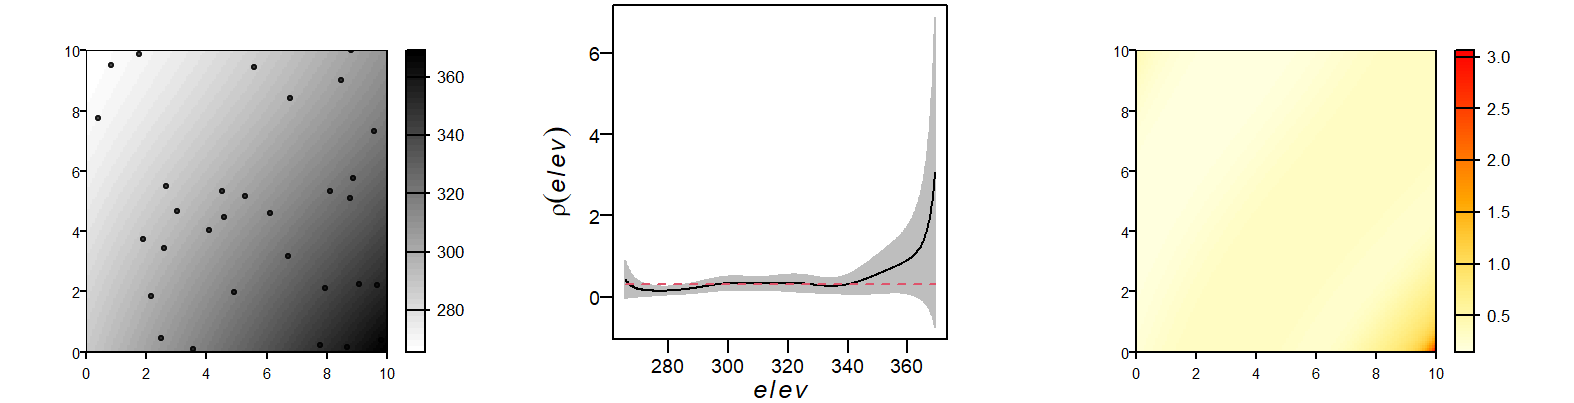 An estimate of $\rho$ using the ratio method. The figure on the left shows the point distribution superimposed on the elevation layer. The middle figure plots the estimated $\rho$ as a function of elevation. The envelope shows the 95% confidence interval. The figure on the right shows the modeled density of $\widehat{\lambda}$ which is a function of the elevation raster (i.e. $\widehat{\lambda}=\widehat{\rho}_{elevation}$).